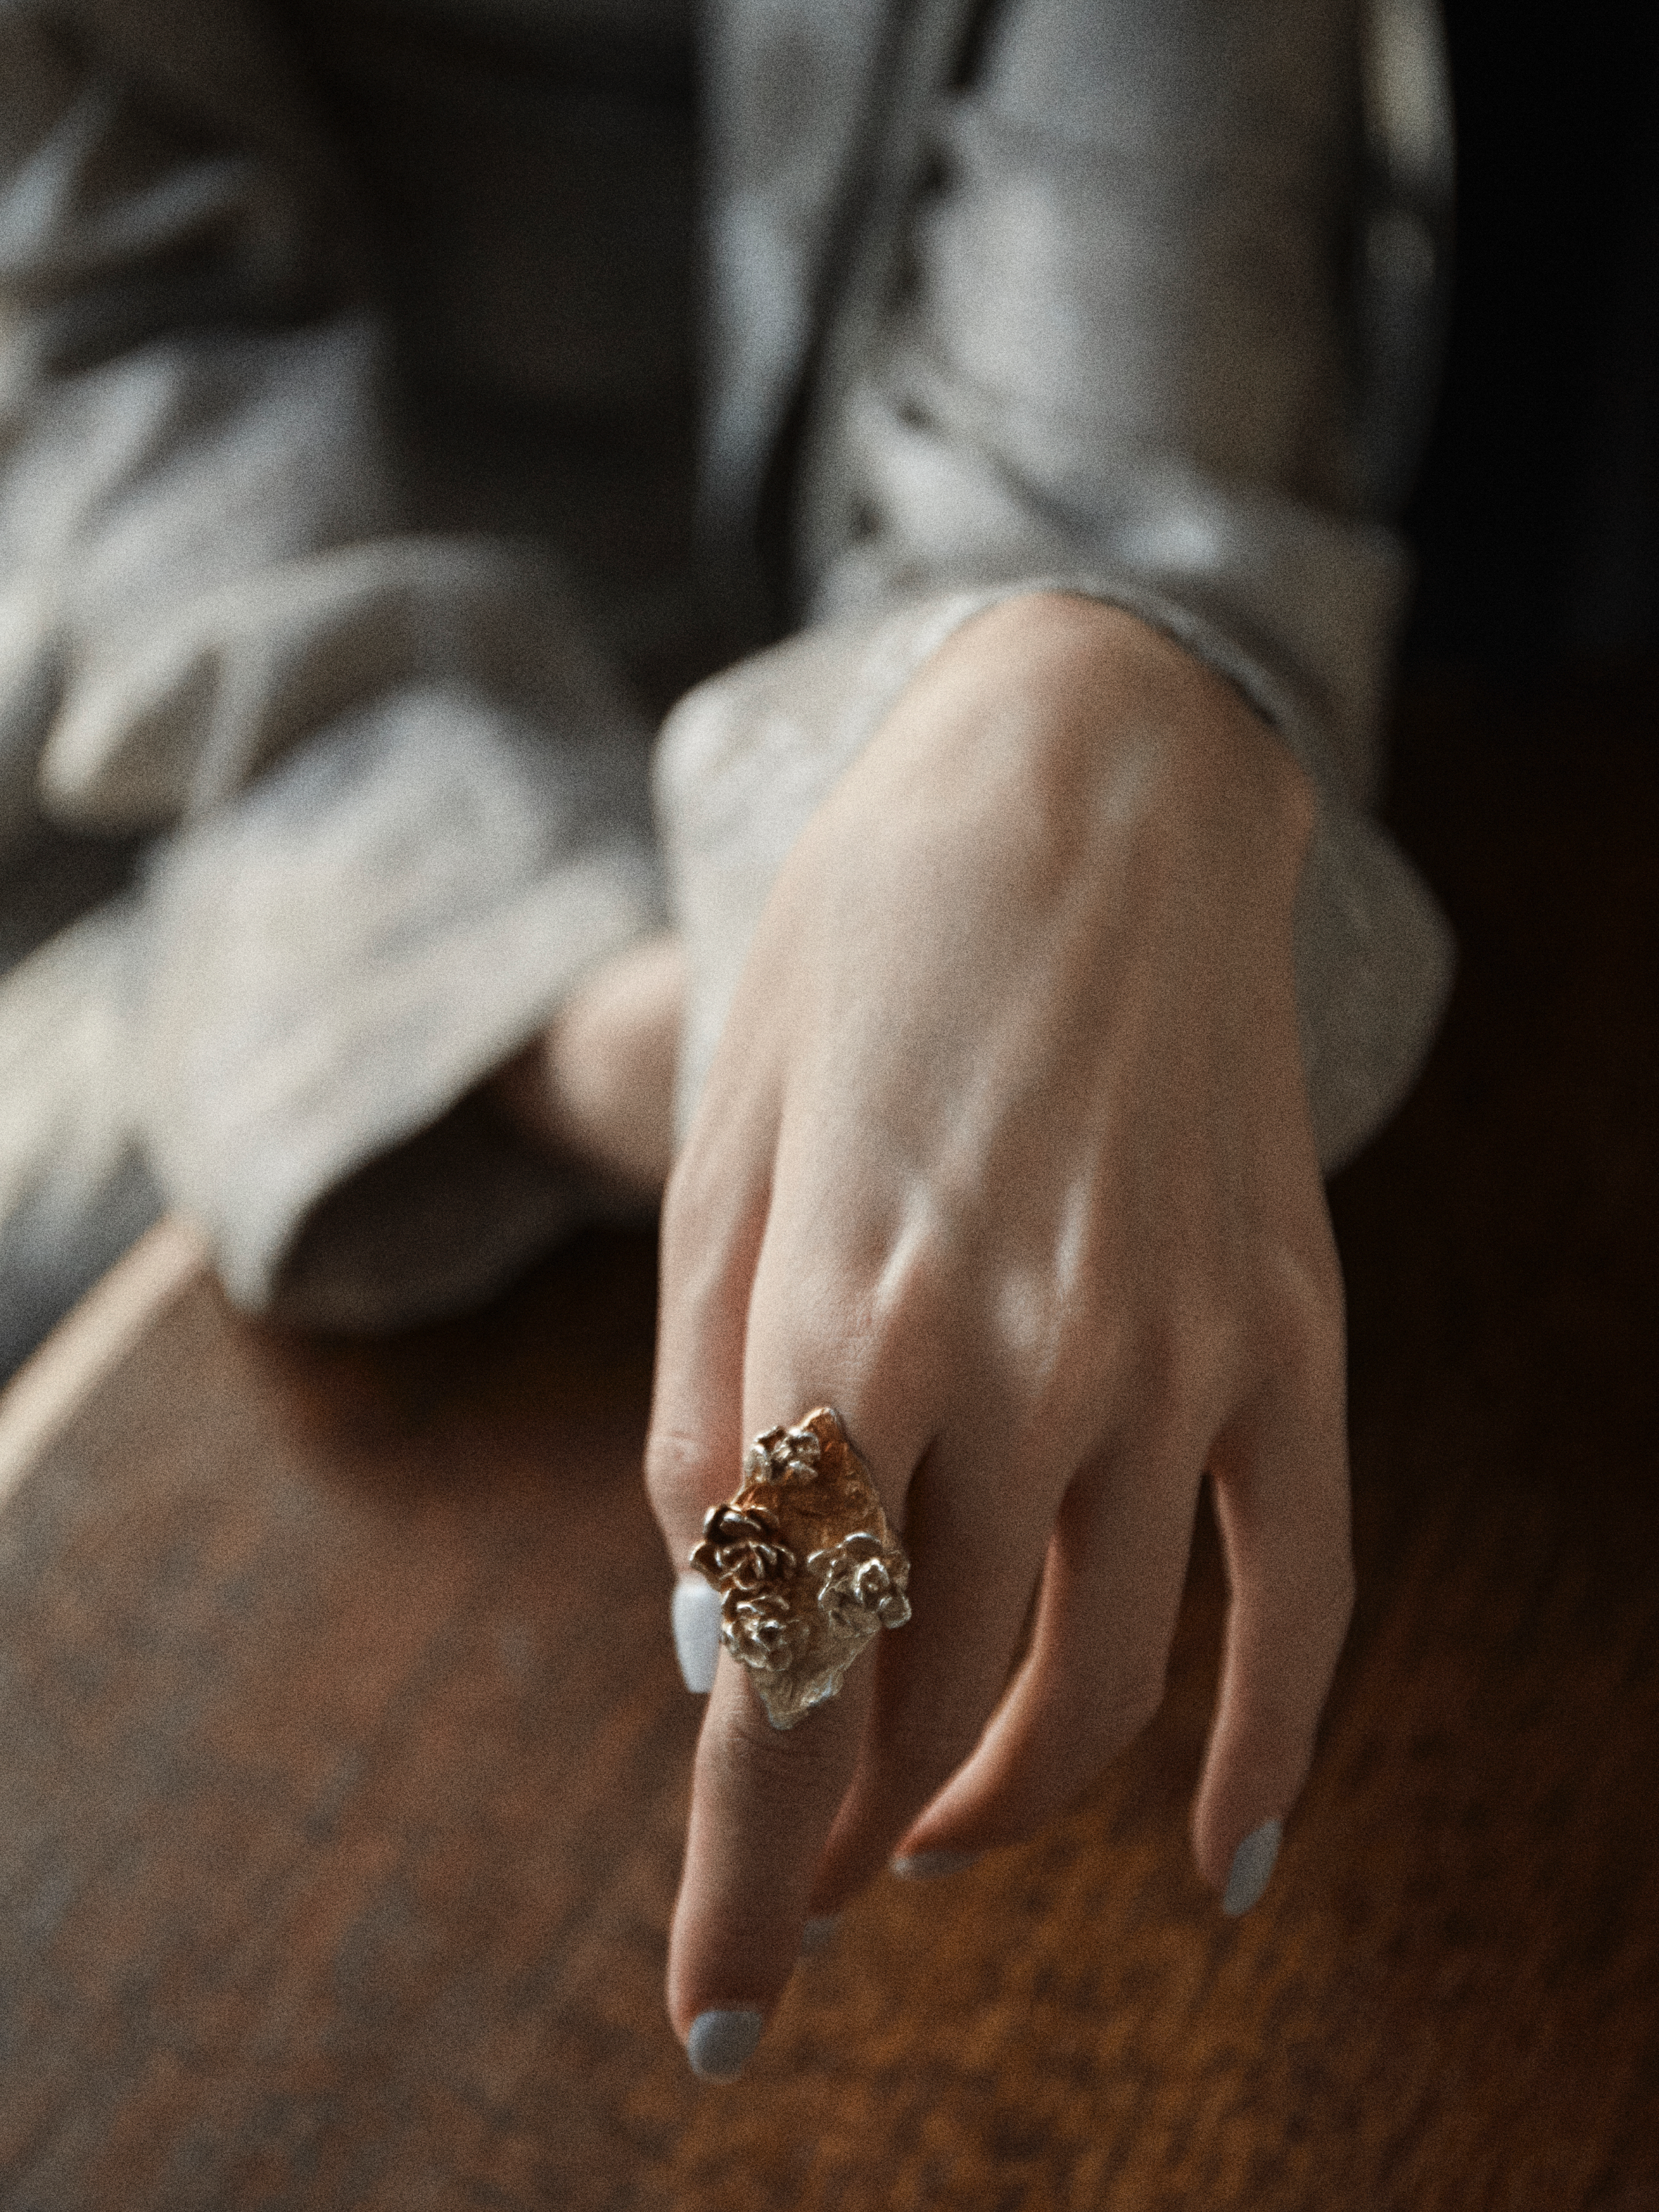 Golden Three-Dimensional Carved Ring